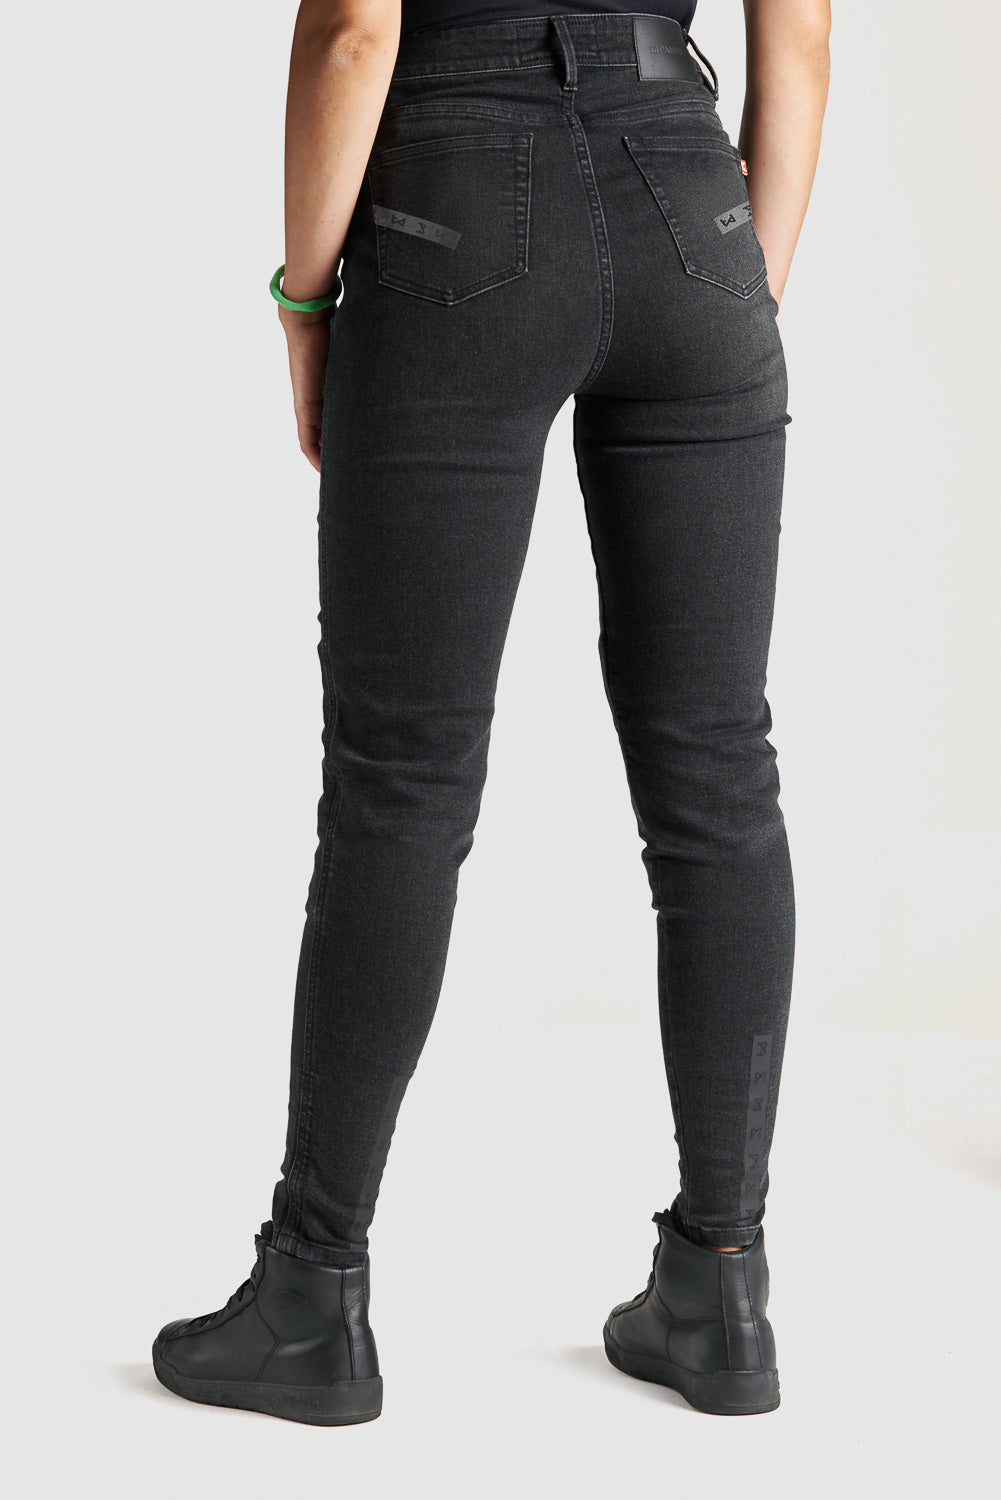 woman&#39;s legs  from the back wearing black high waist motorcycle jeans